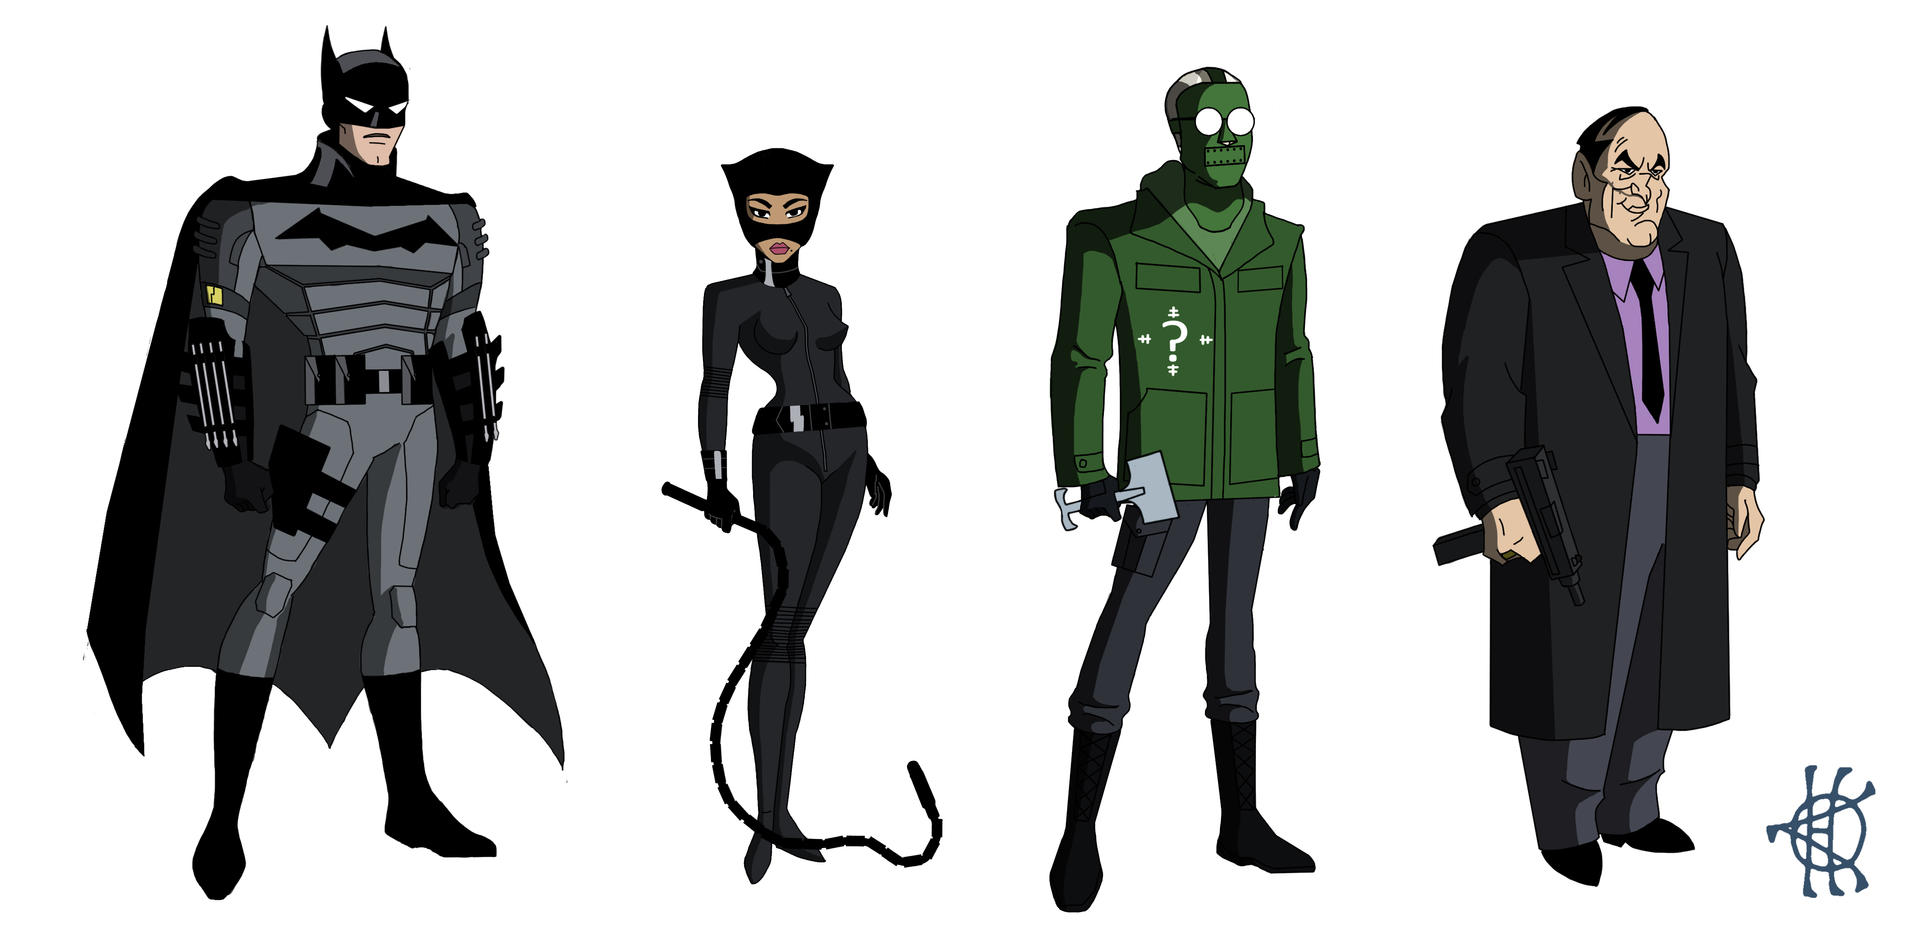 THE BATMAN 2022 ANIMATED SERIES STYLE by Concept-V on DeviantArt